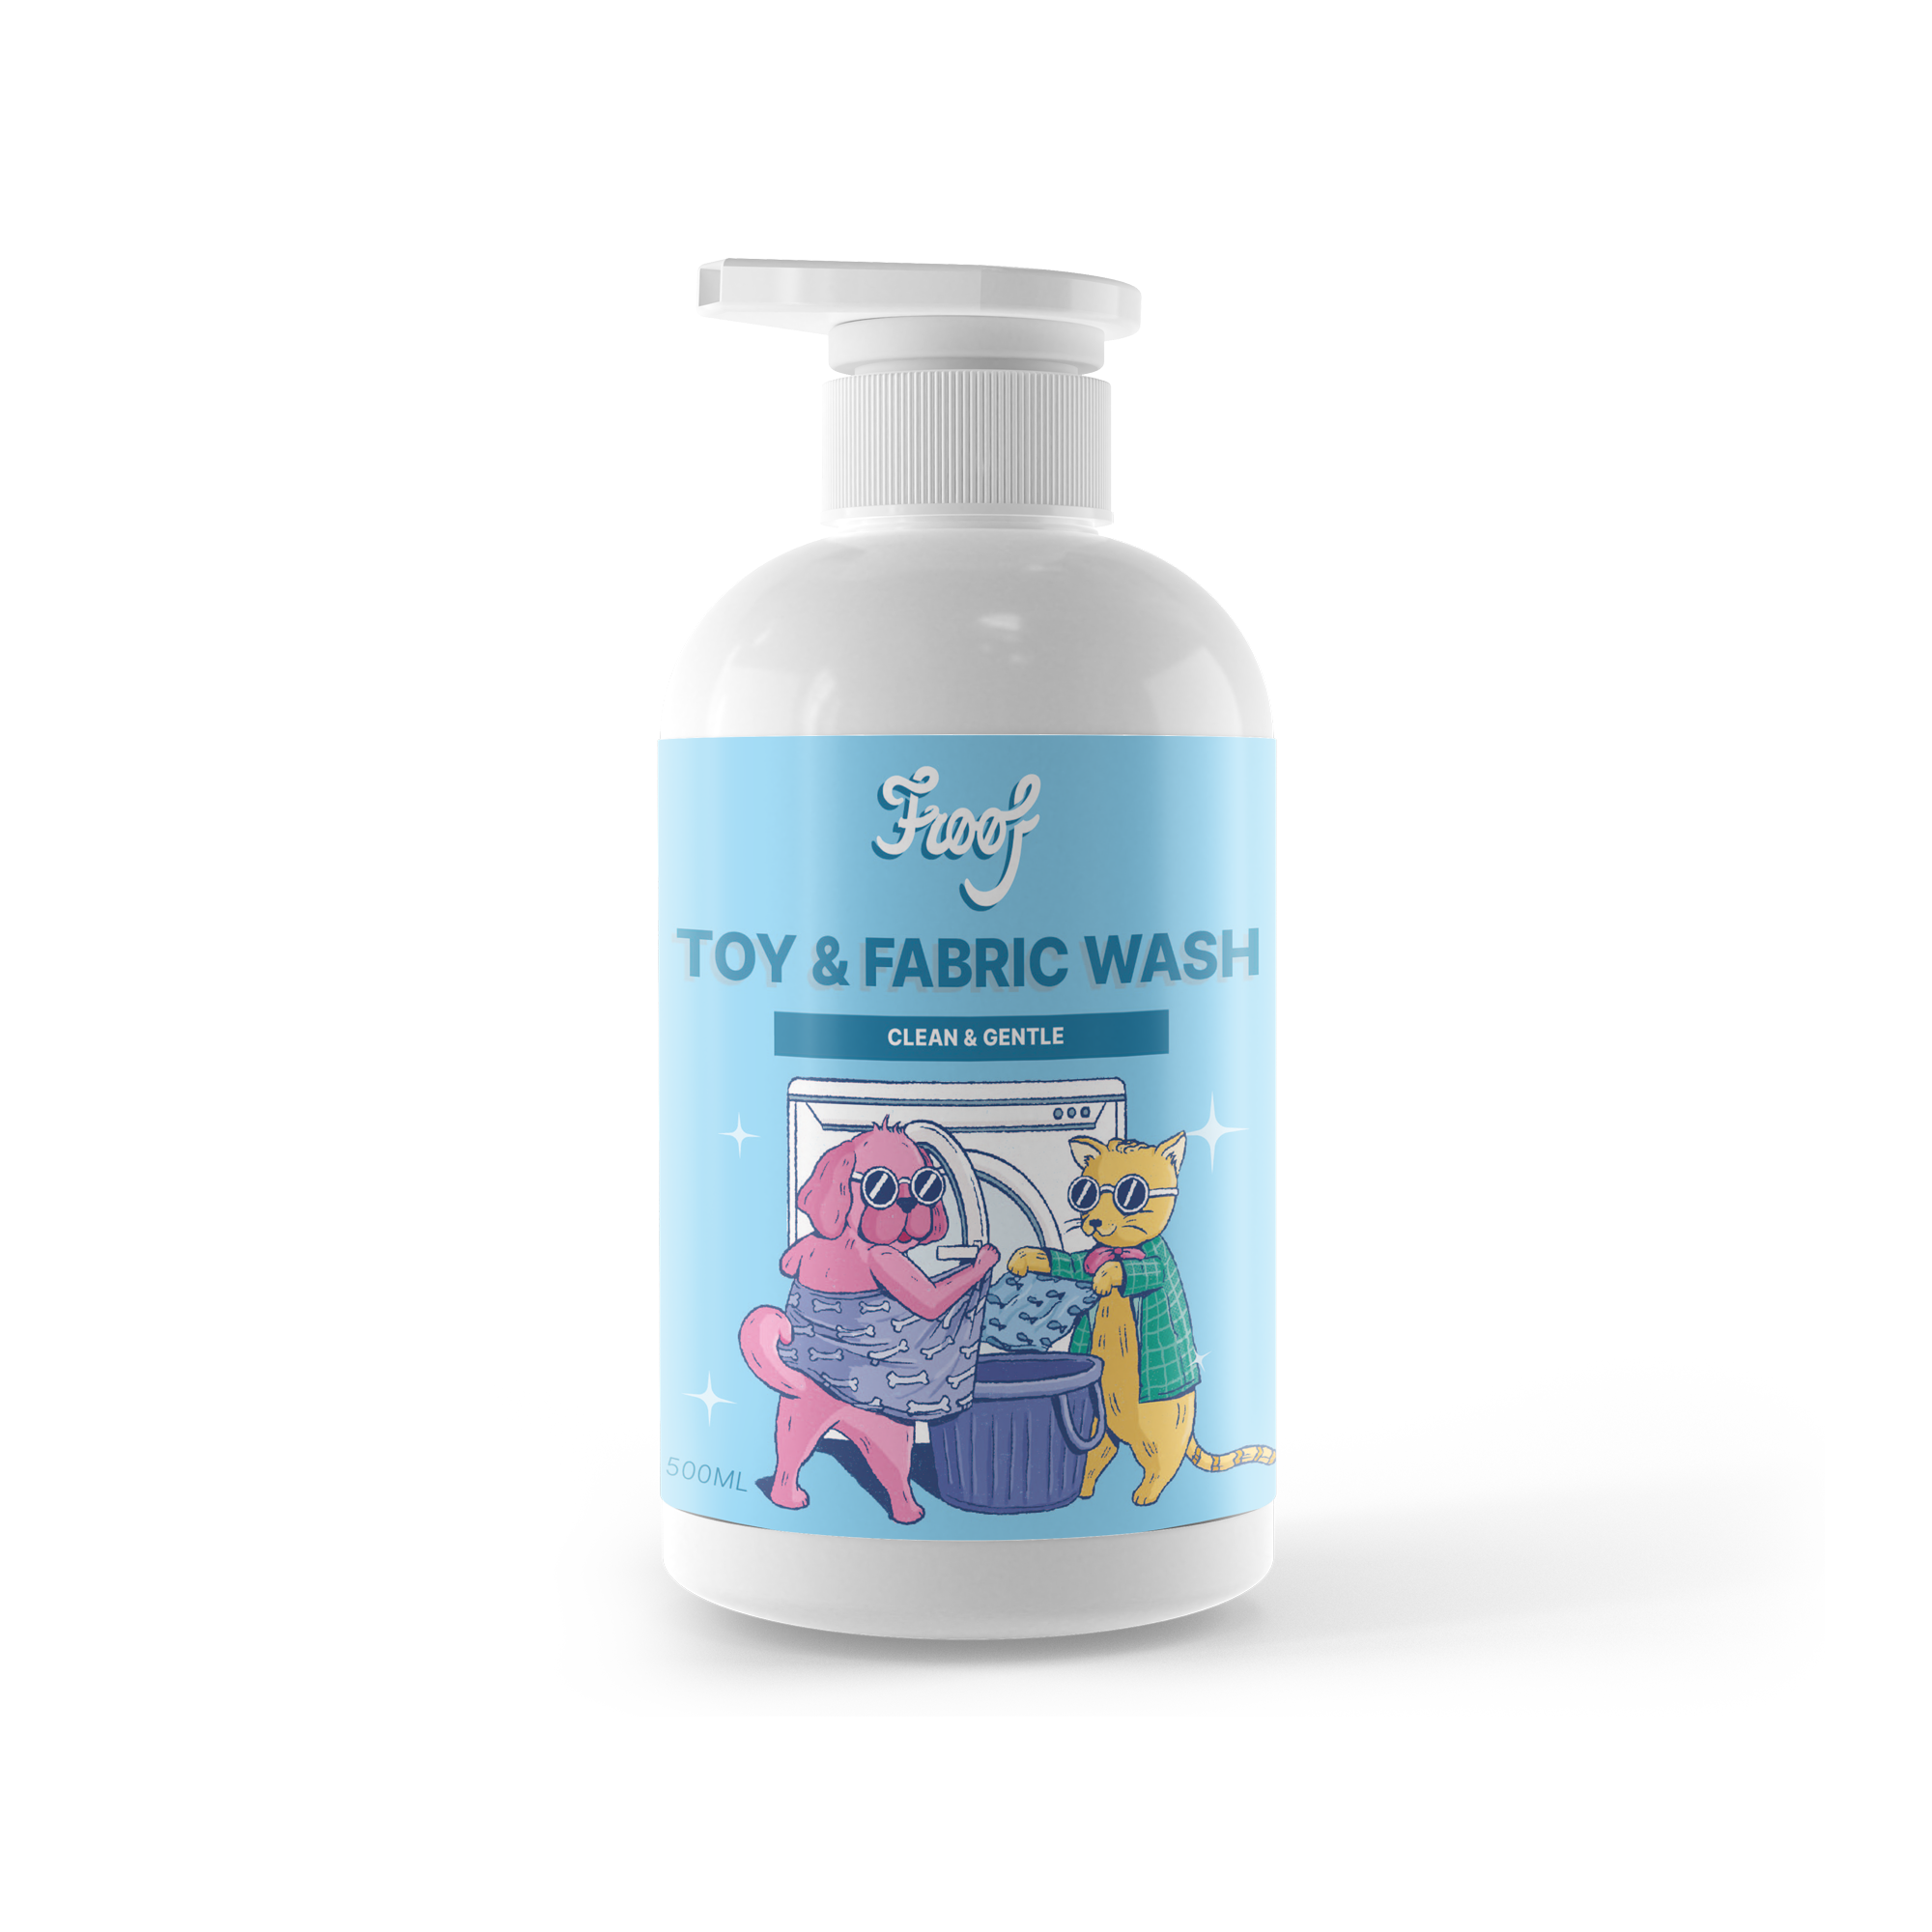 Froof Toy & Fabric Wash - Clean & Gentle